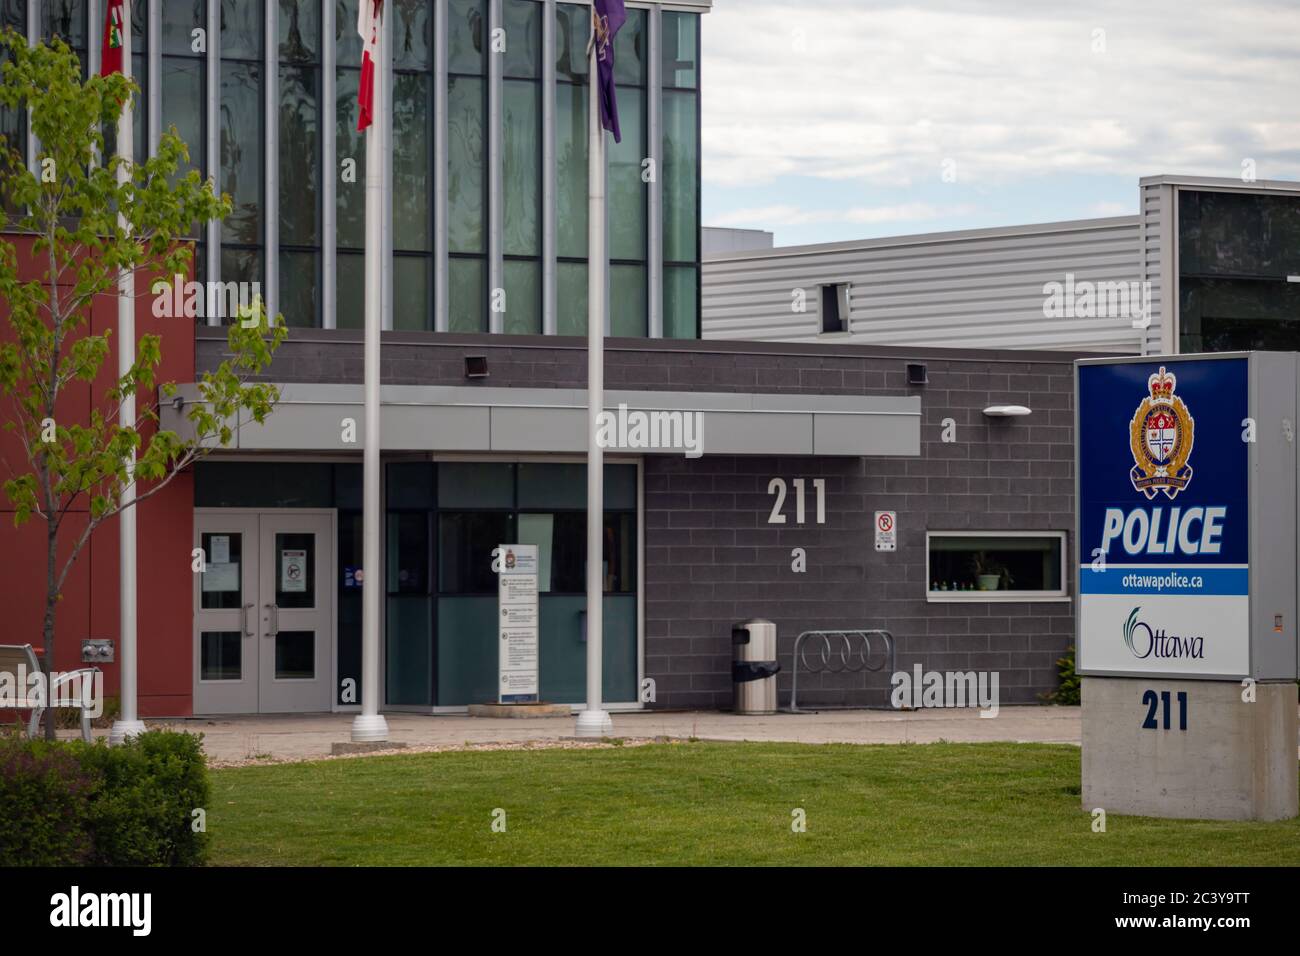 The Ottawa Police station in at 211 Huntmar Drive in Ottawa, Ontario, Canada offers collision and crime reporting services through its service desk. Stock Photo